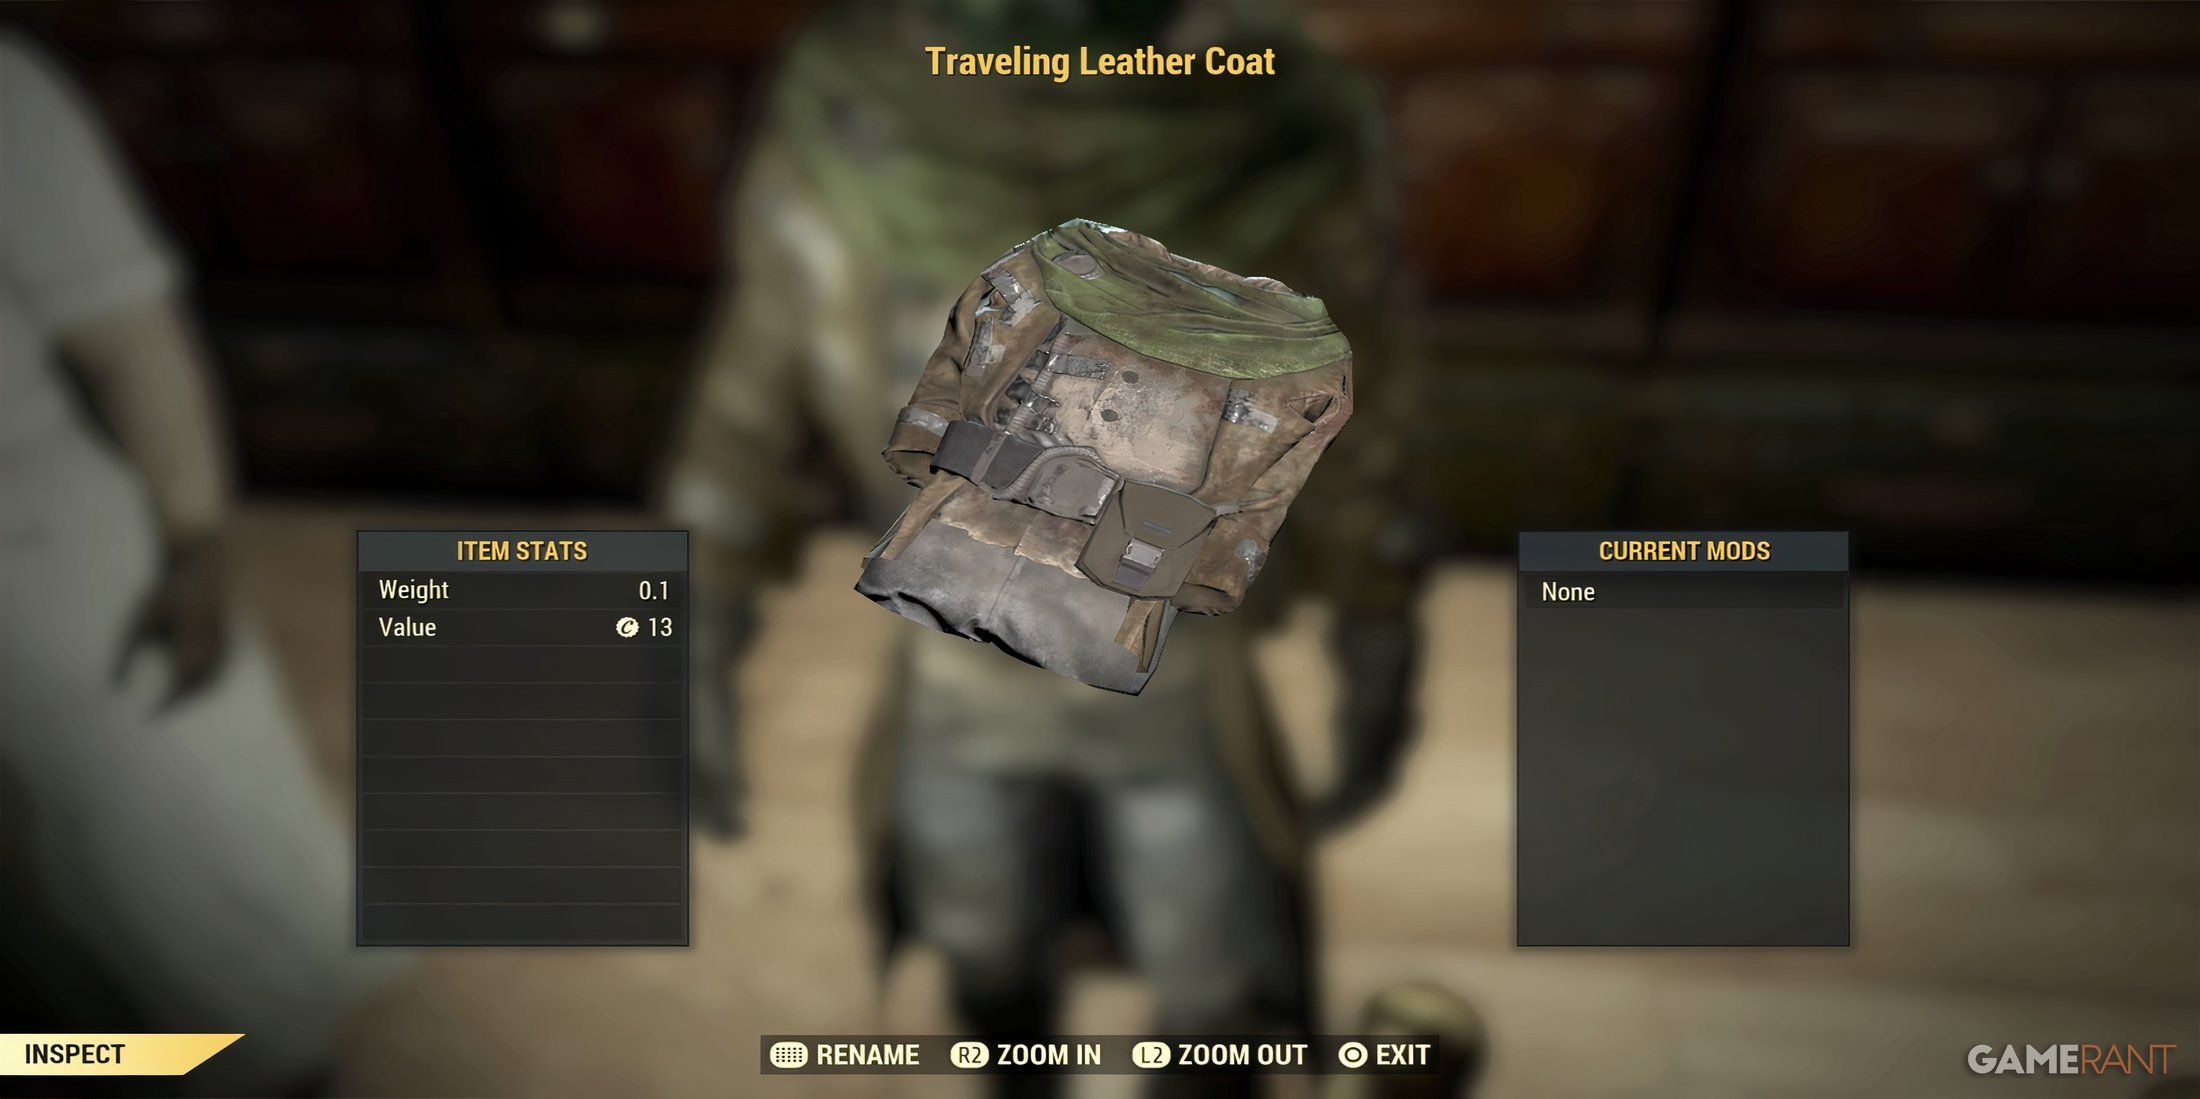 Traveling Leather Coat in Fallout 76